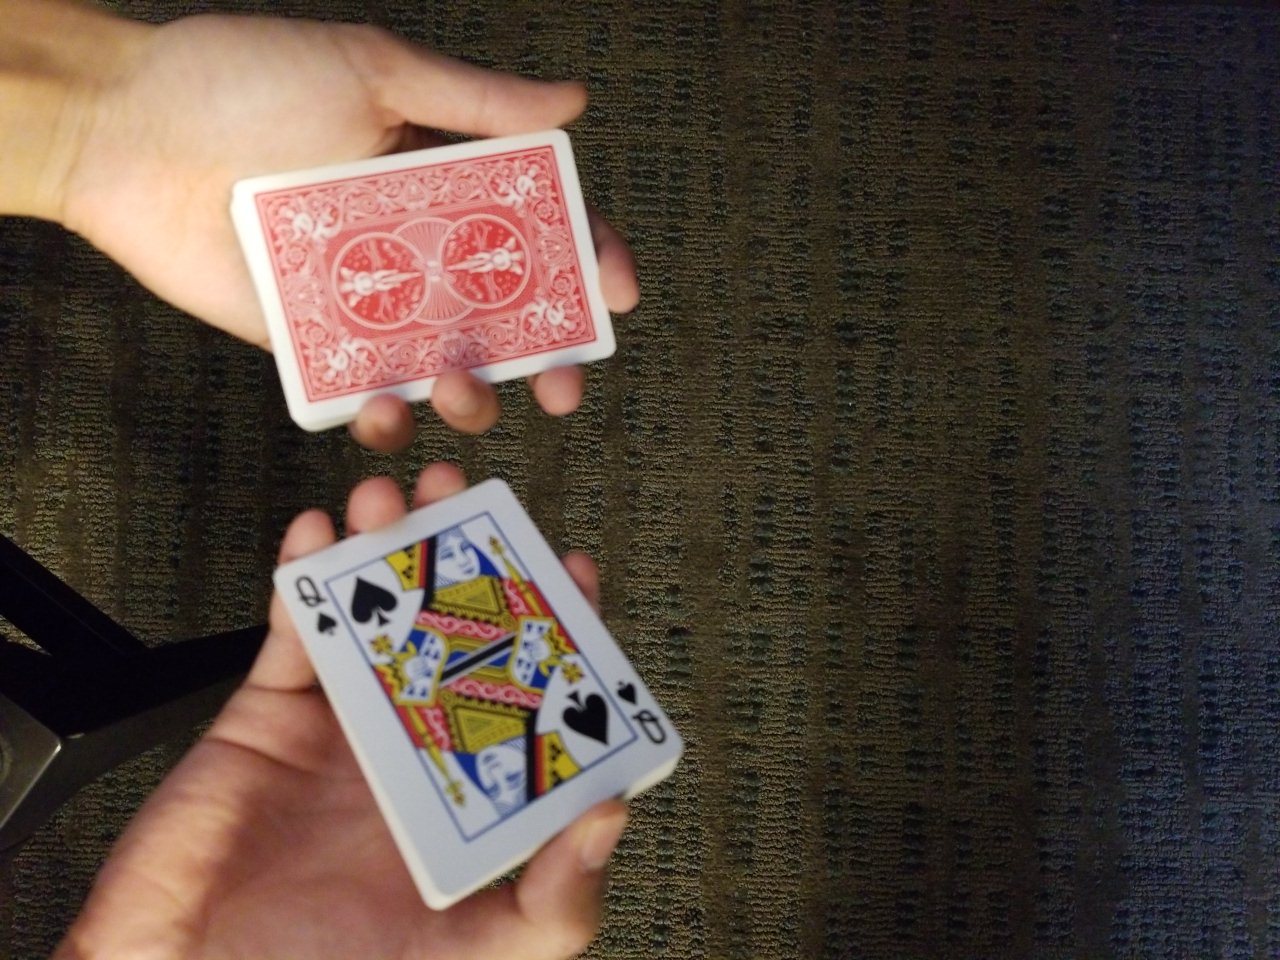 cutting to a specific card